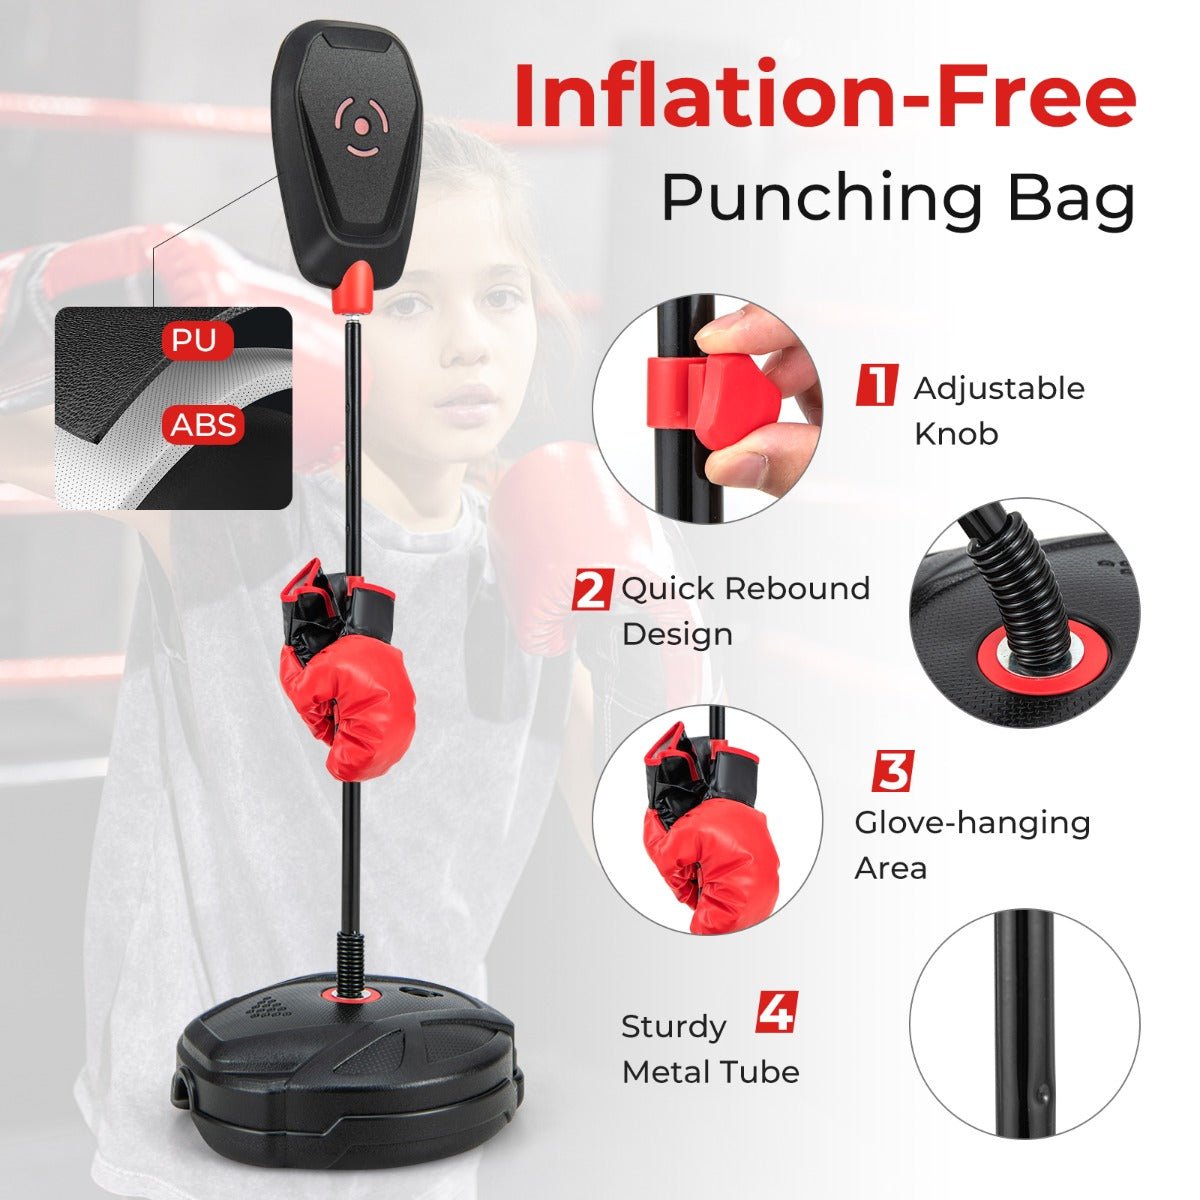 Punch Your Way to Fun with Kids Boxing Set